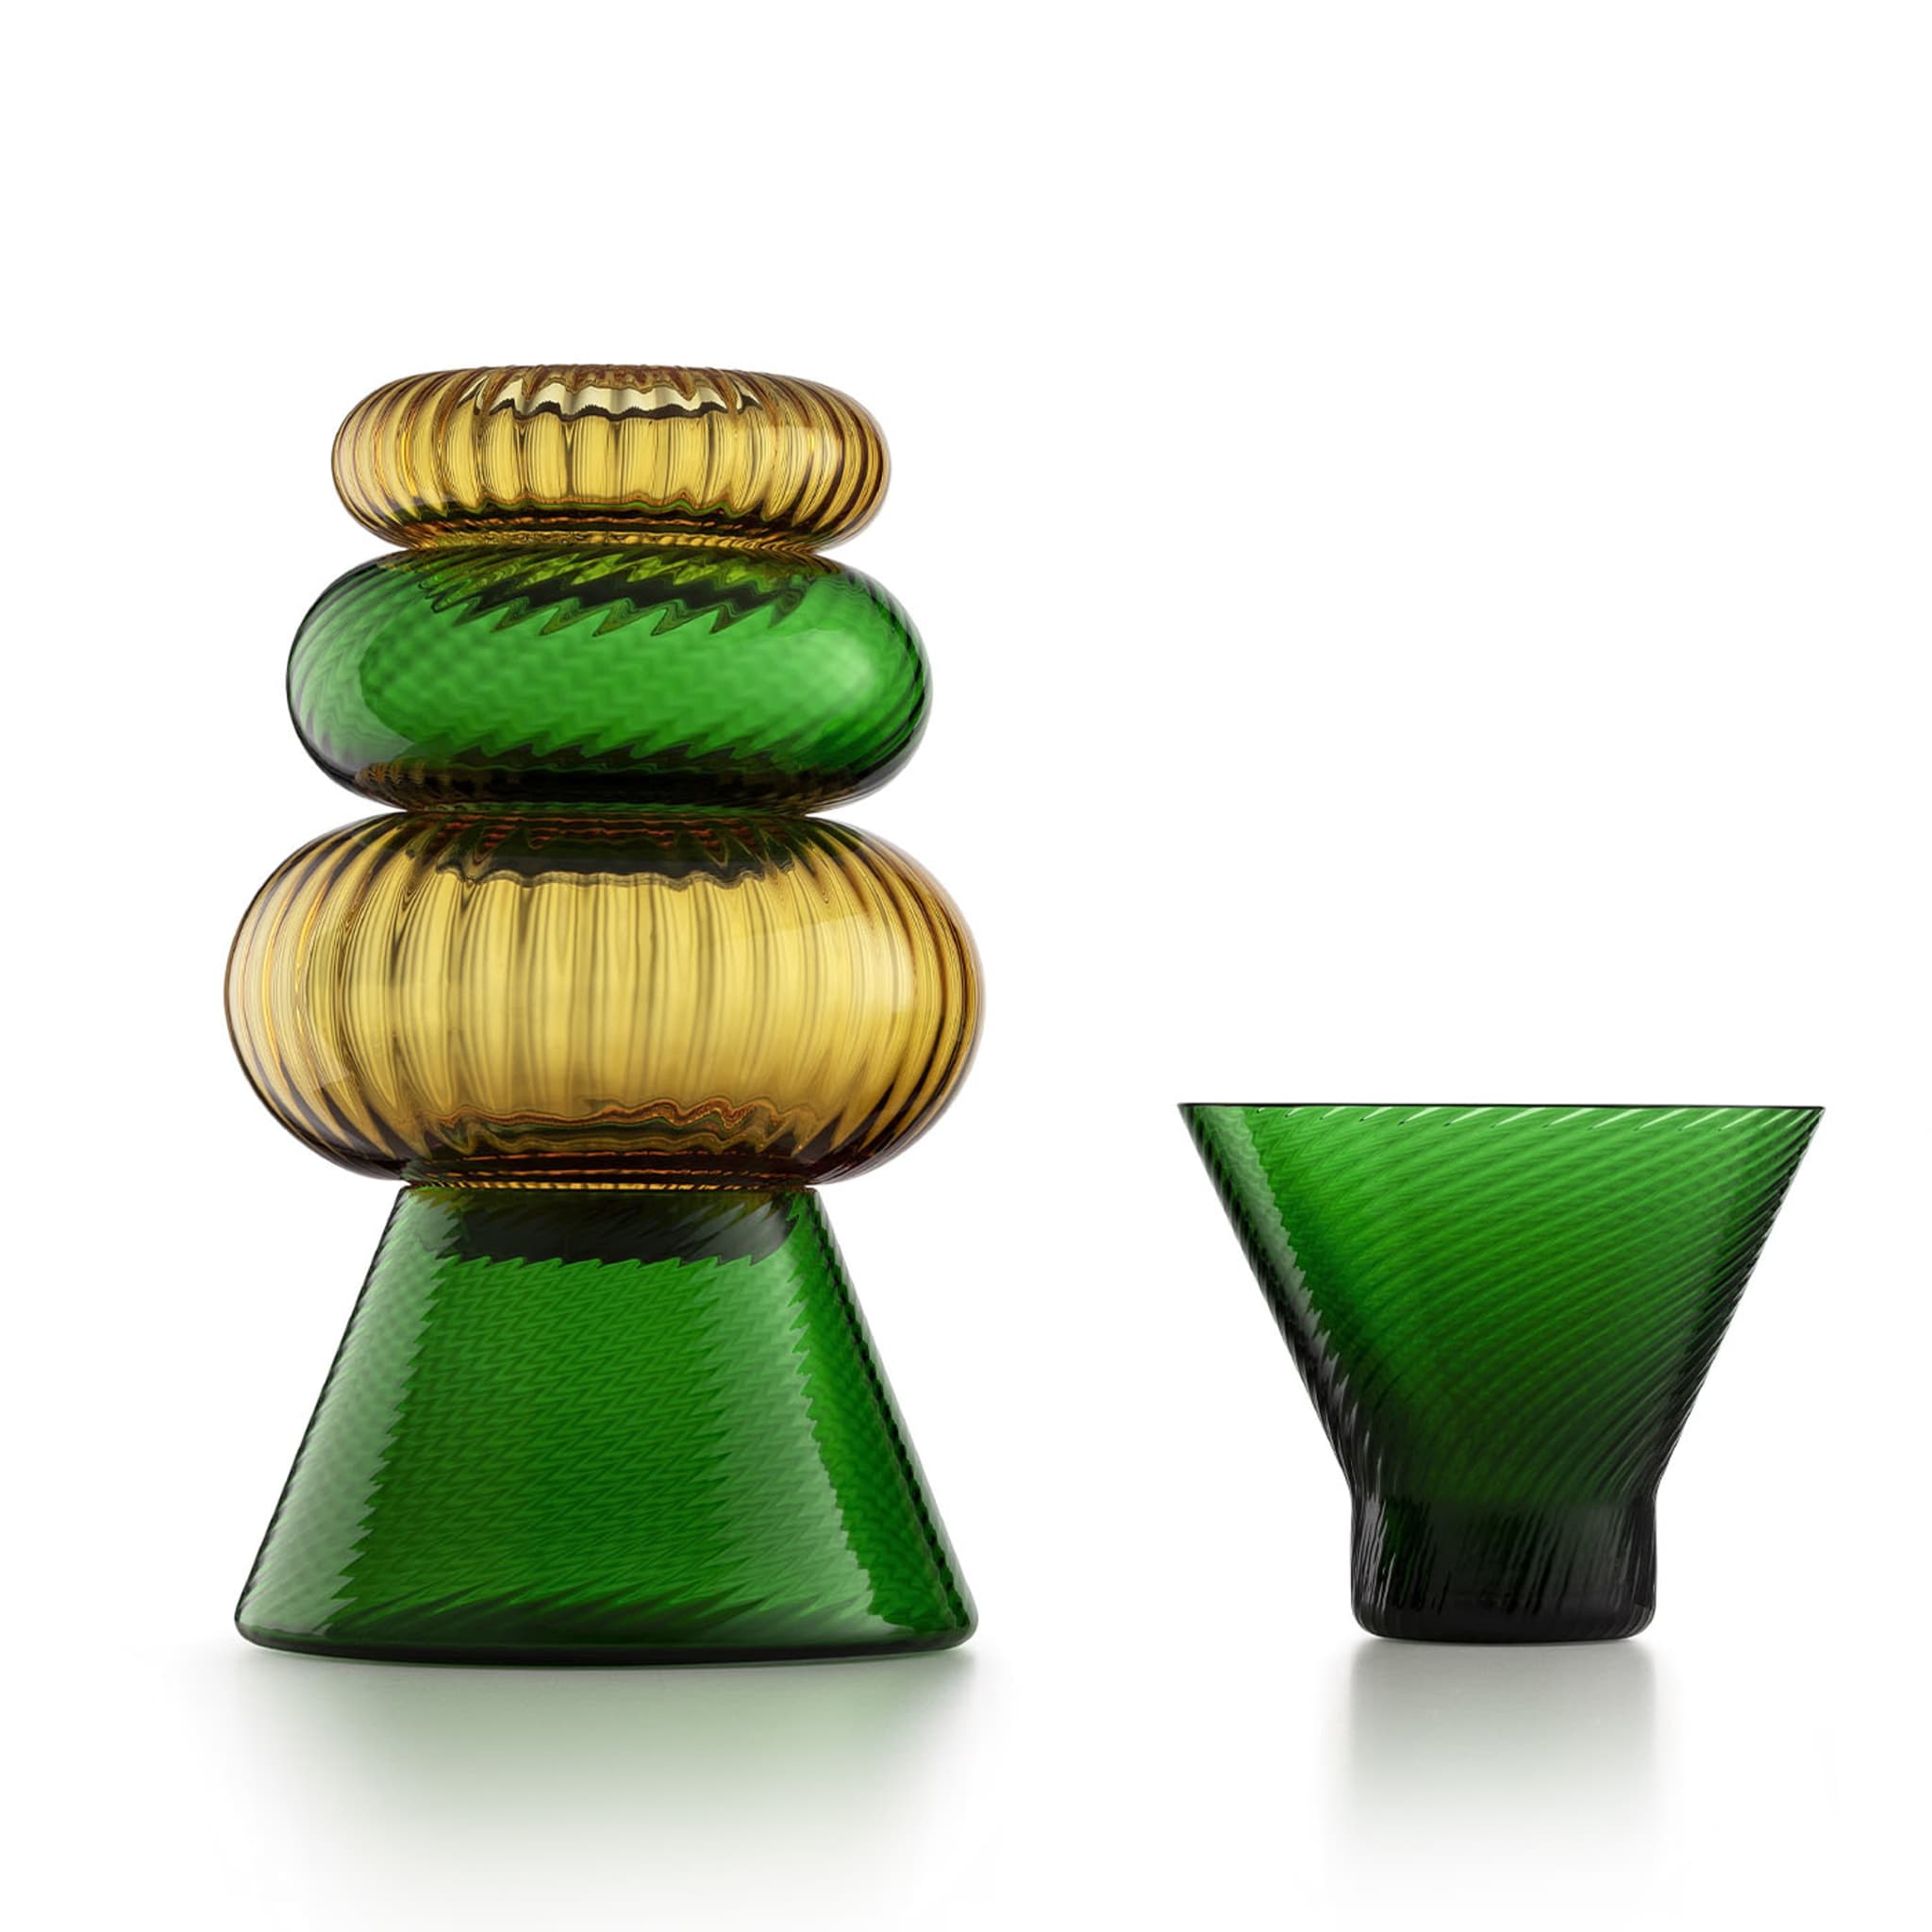 Issey Set of 5 Green and Amber Vases By Matteo Zorzenoni - Alternative view 3